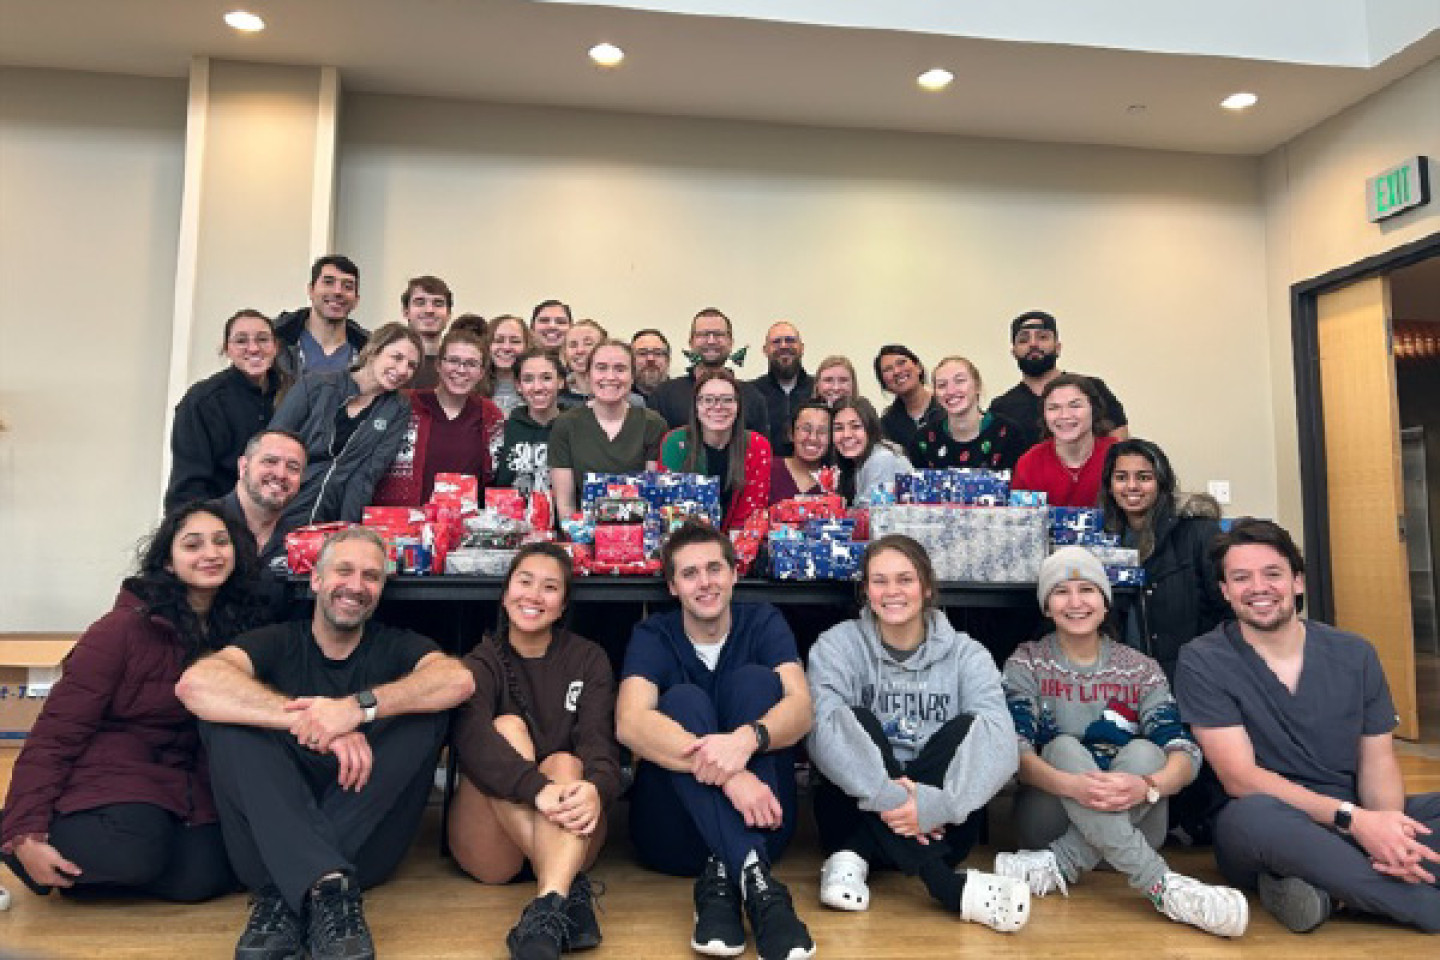 WMU PA students and faculty with the Christmas gifts